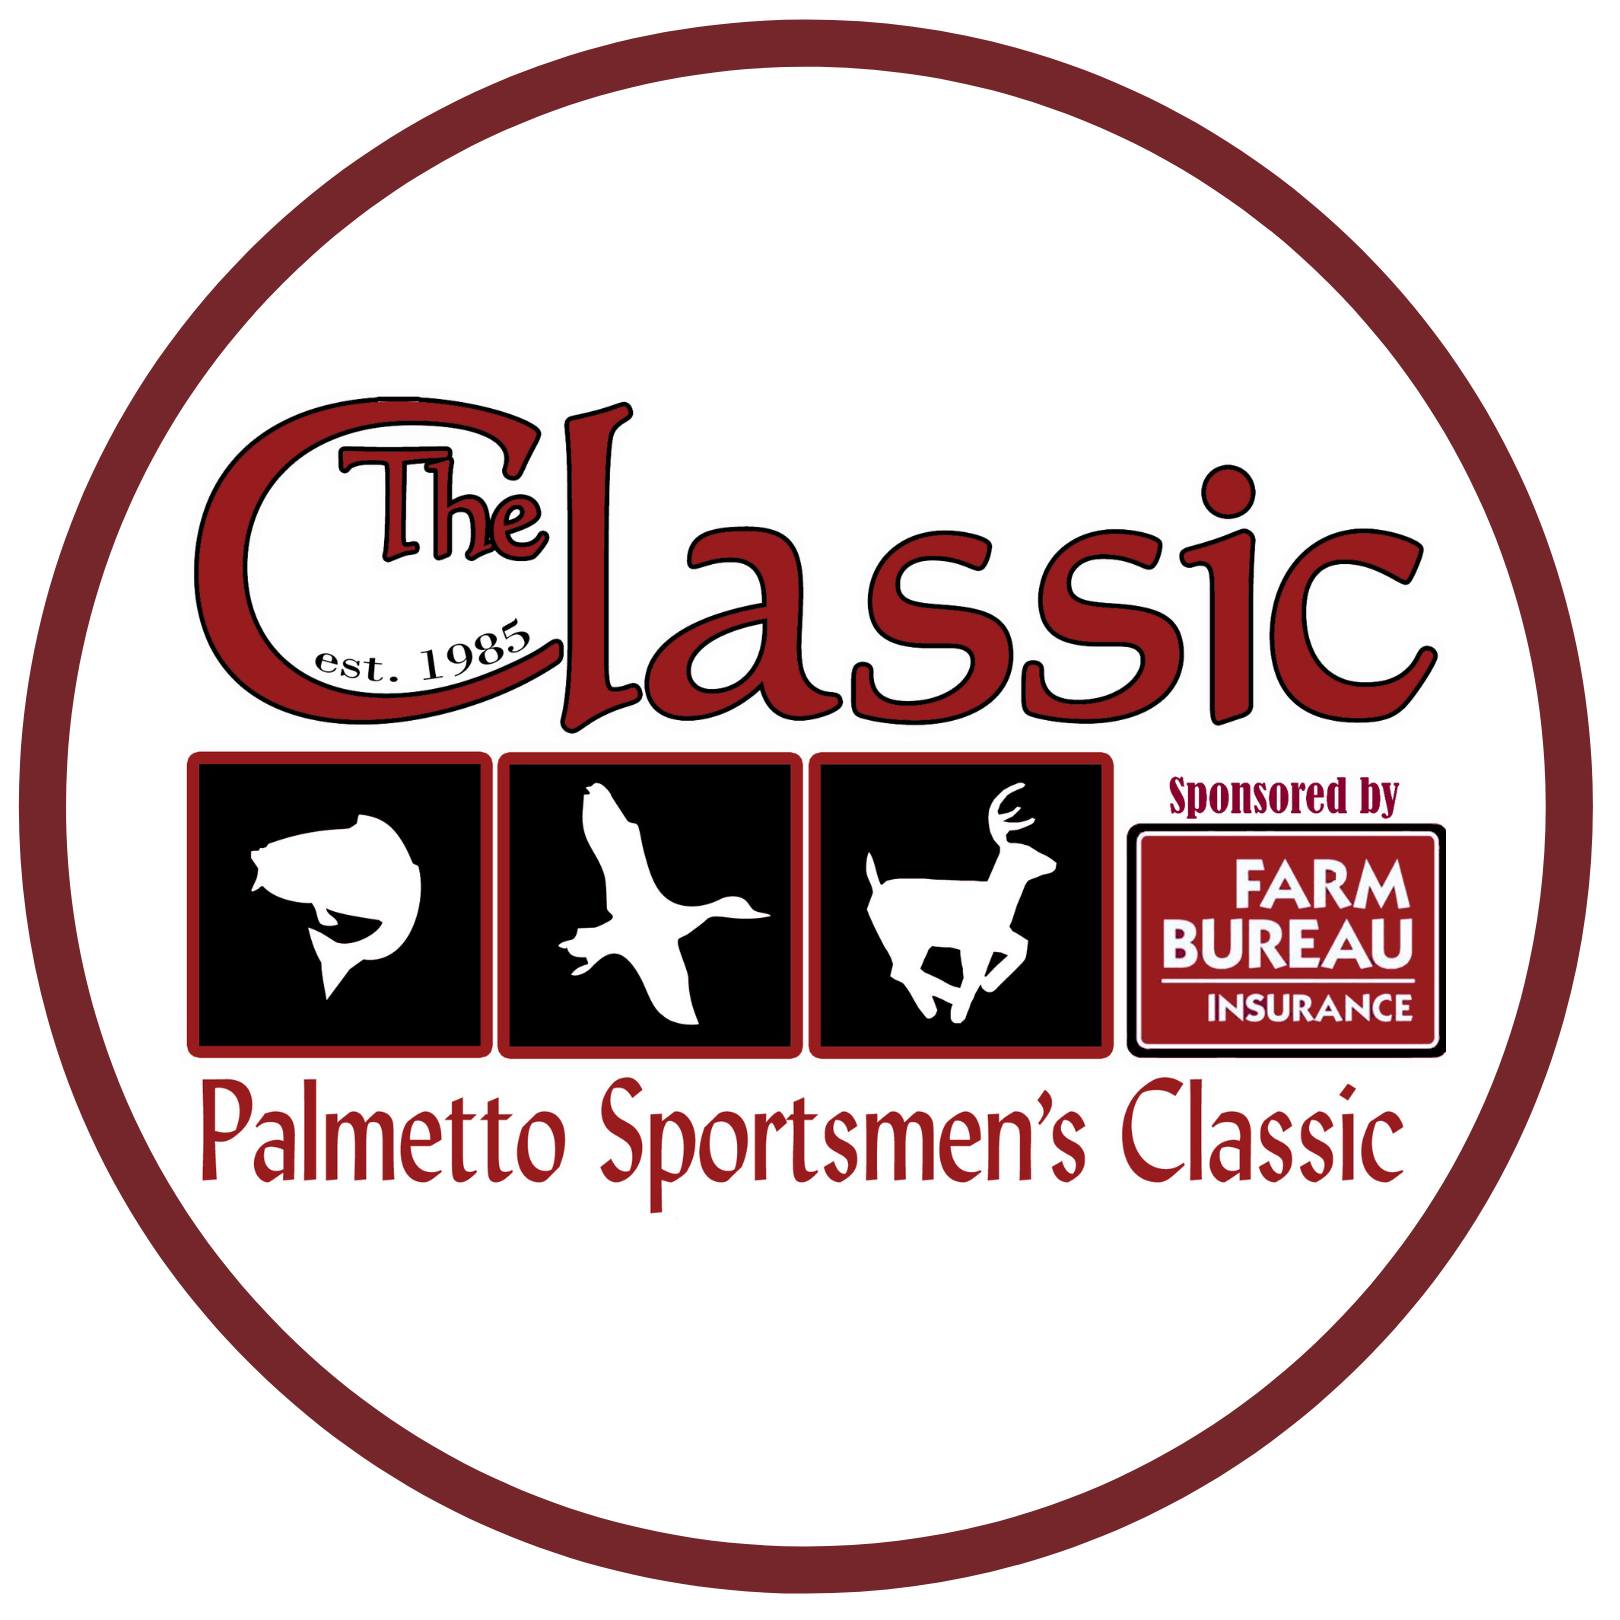 The Classic Palmetto Sportsmen's classic presented by farm bureau insurance graphic of striped bass pheasant deer established 1985